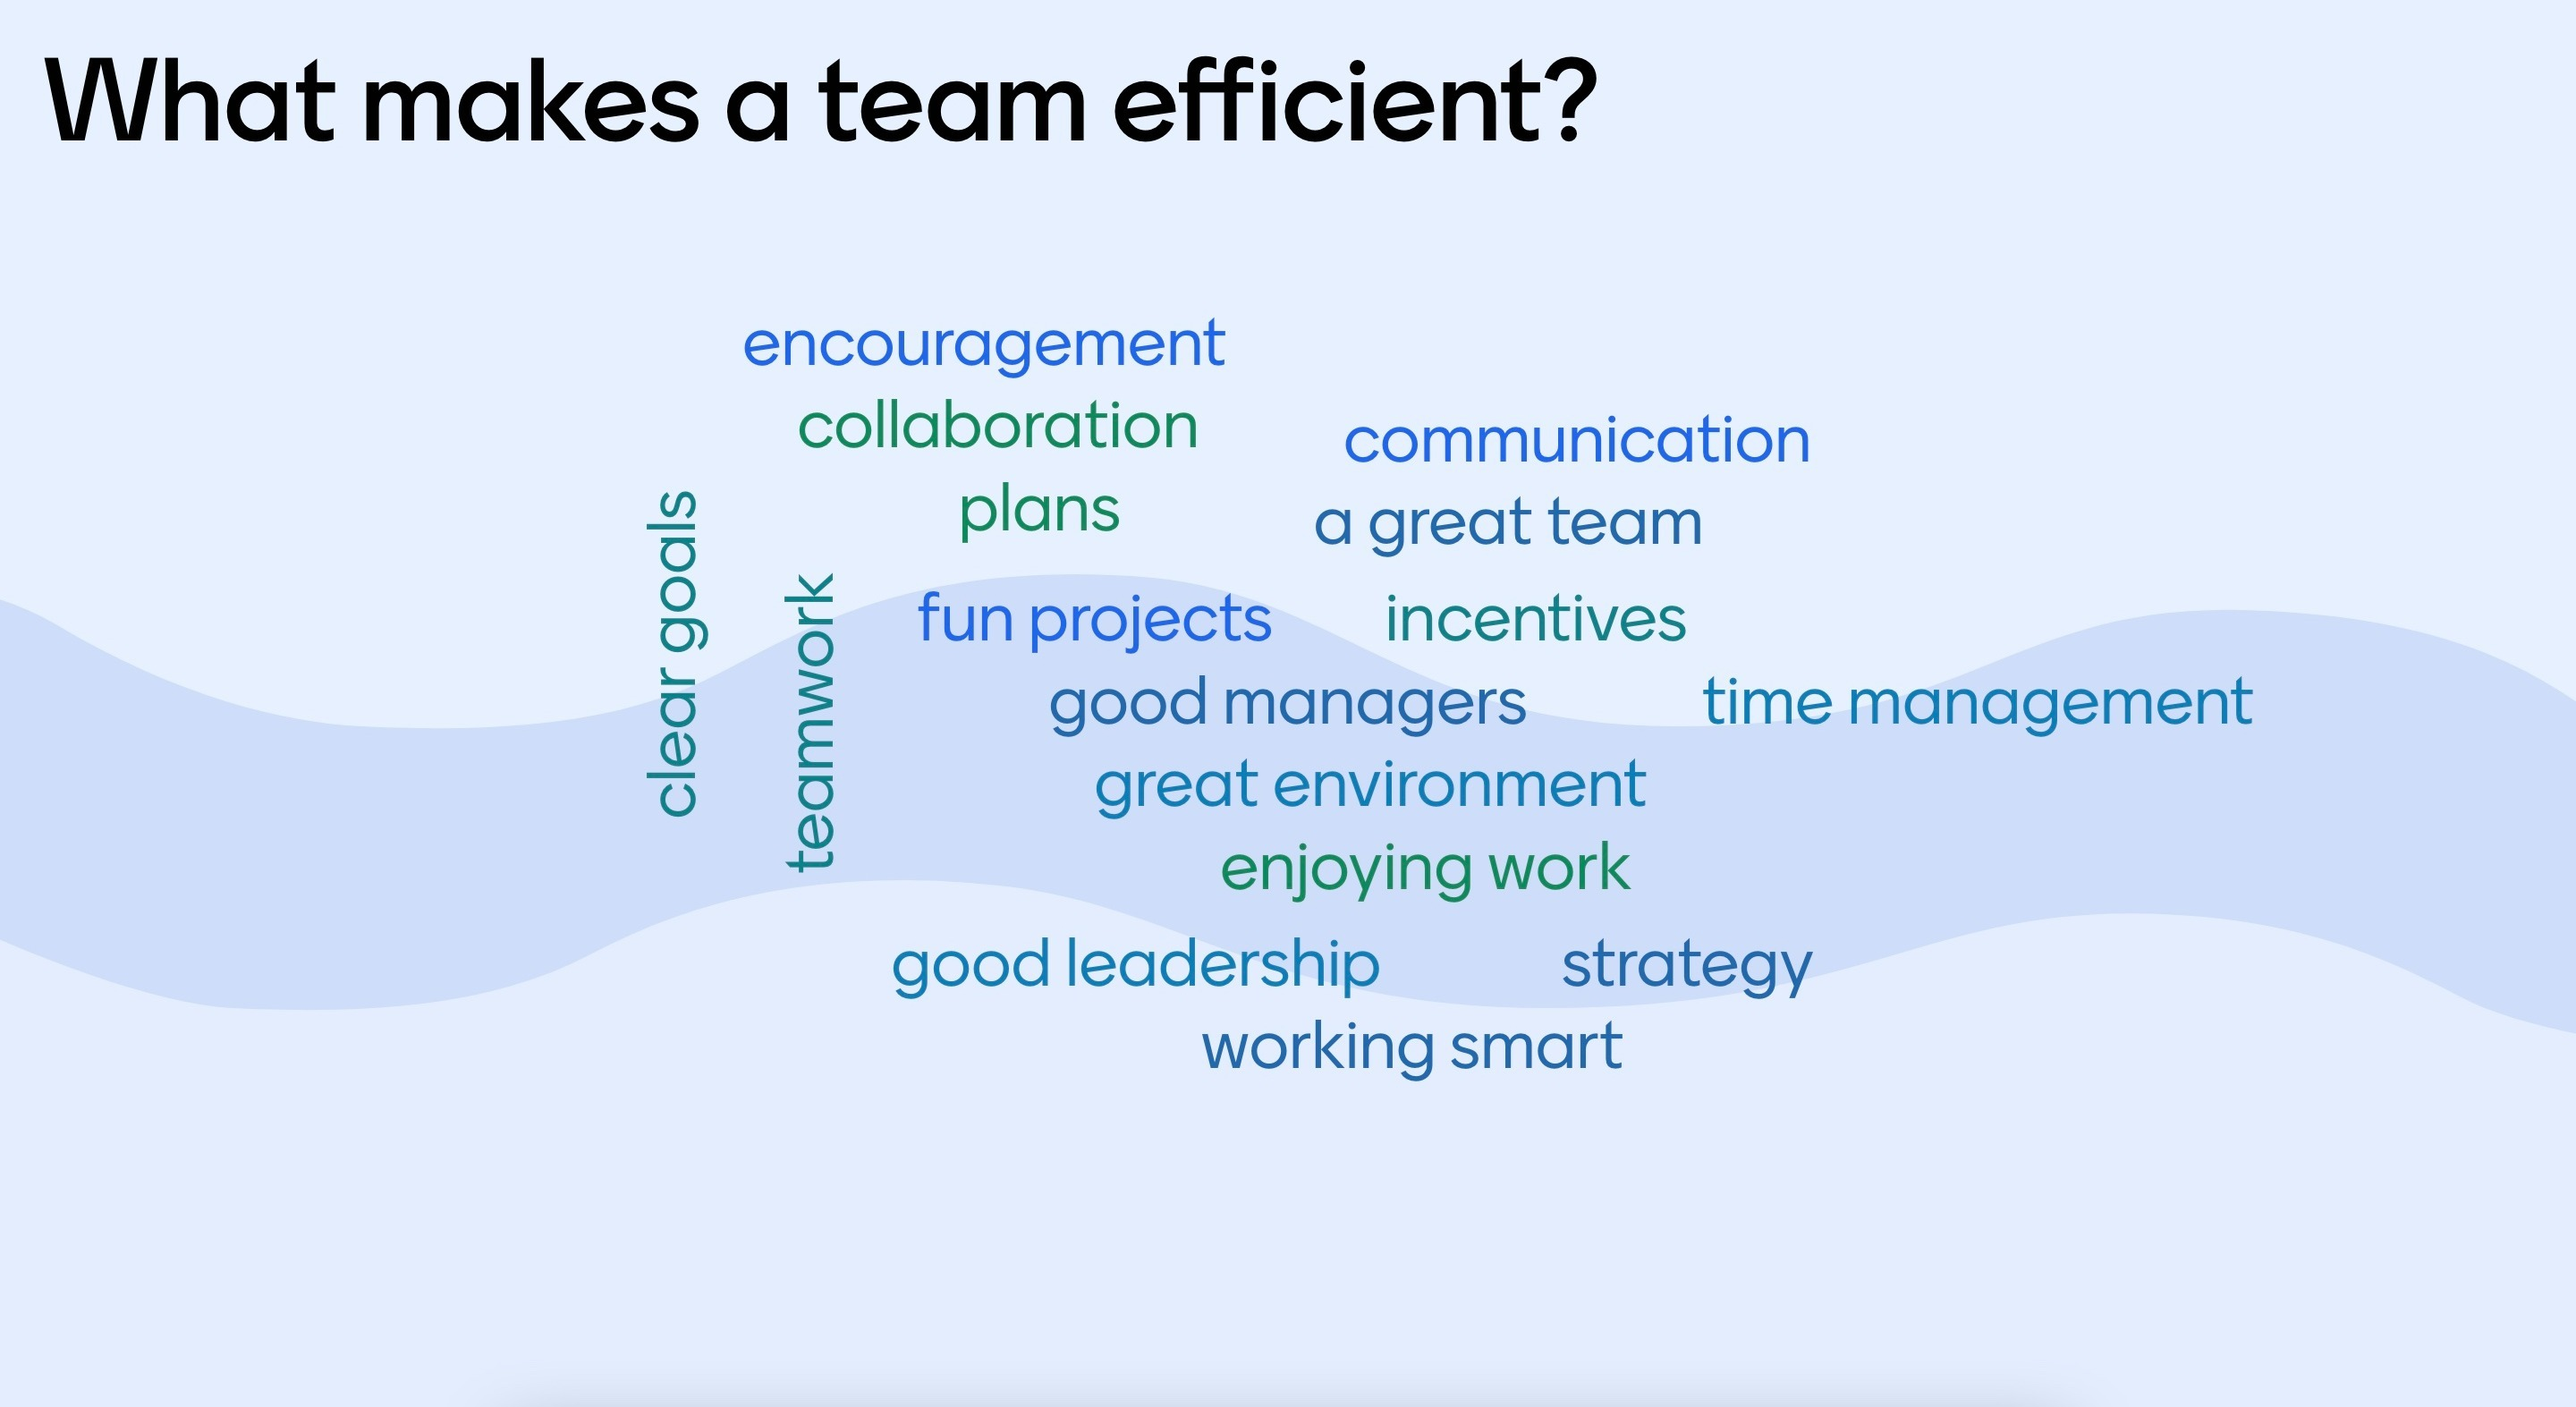 What makes a team efficient explained